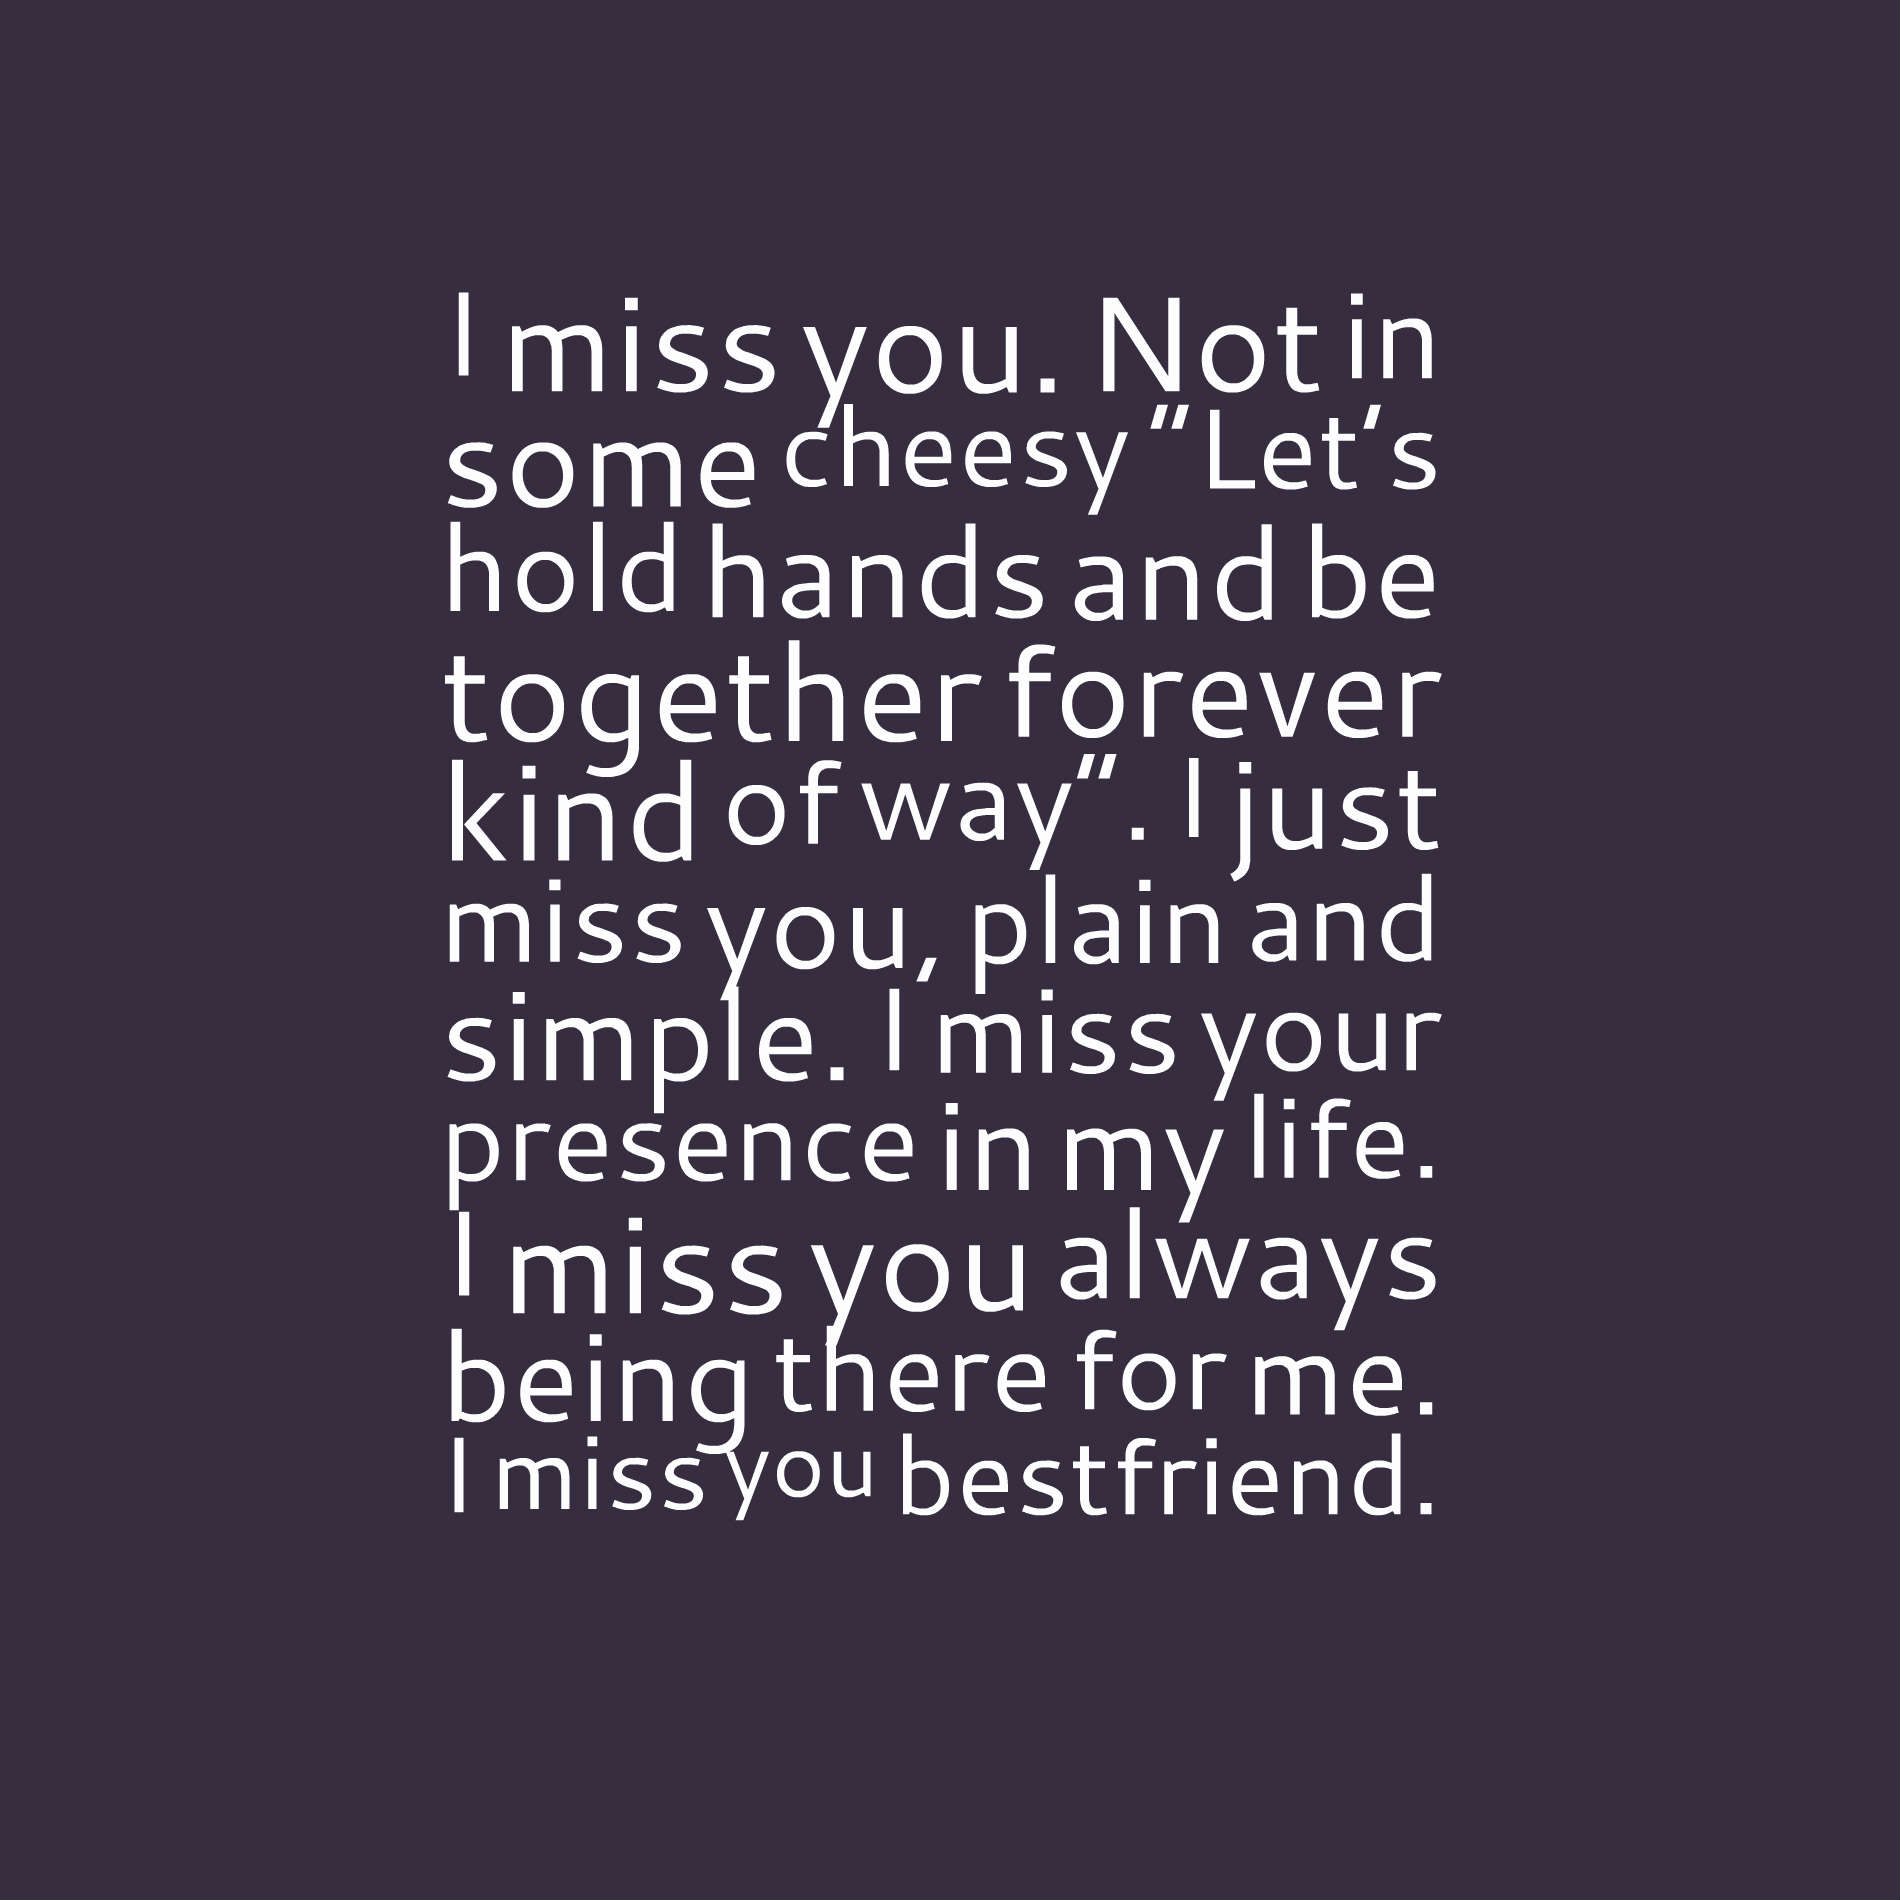 I miss you. Not in some cheesy “Let’s hold hands and be together forever kind of way”. I just miss you, plain and simple. I miss your presence in my life. I miss you always being there for me. I miss you bestfriend.